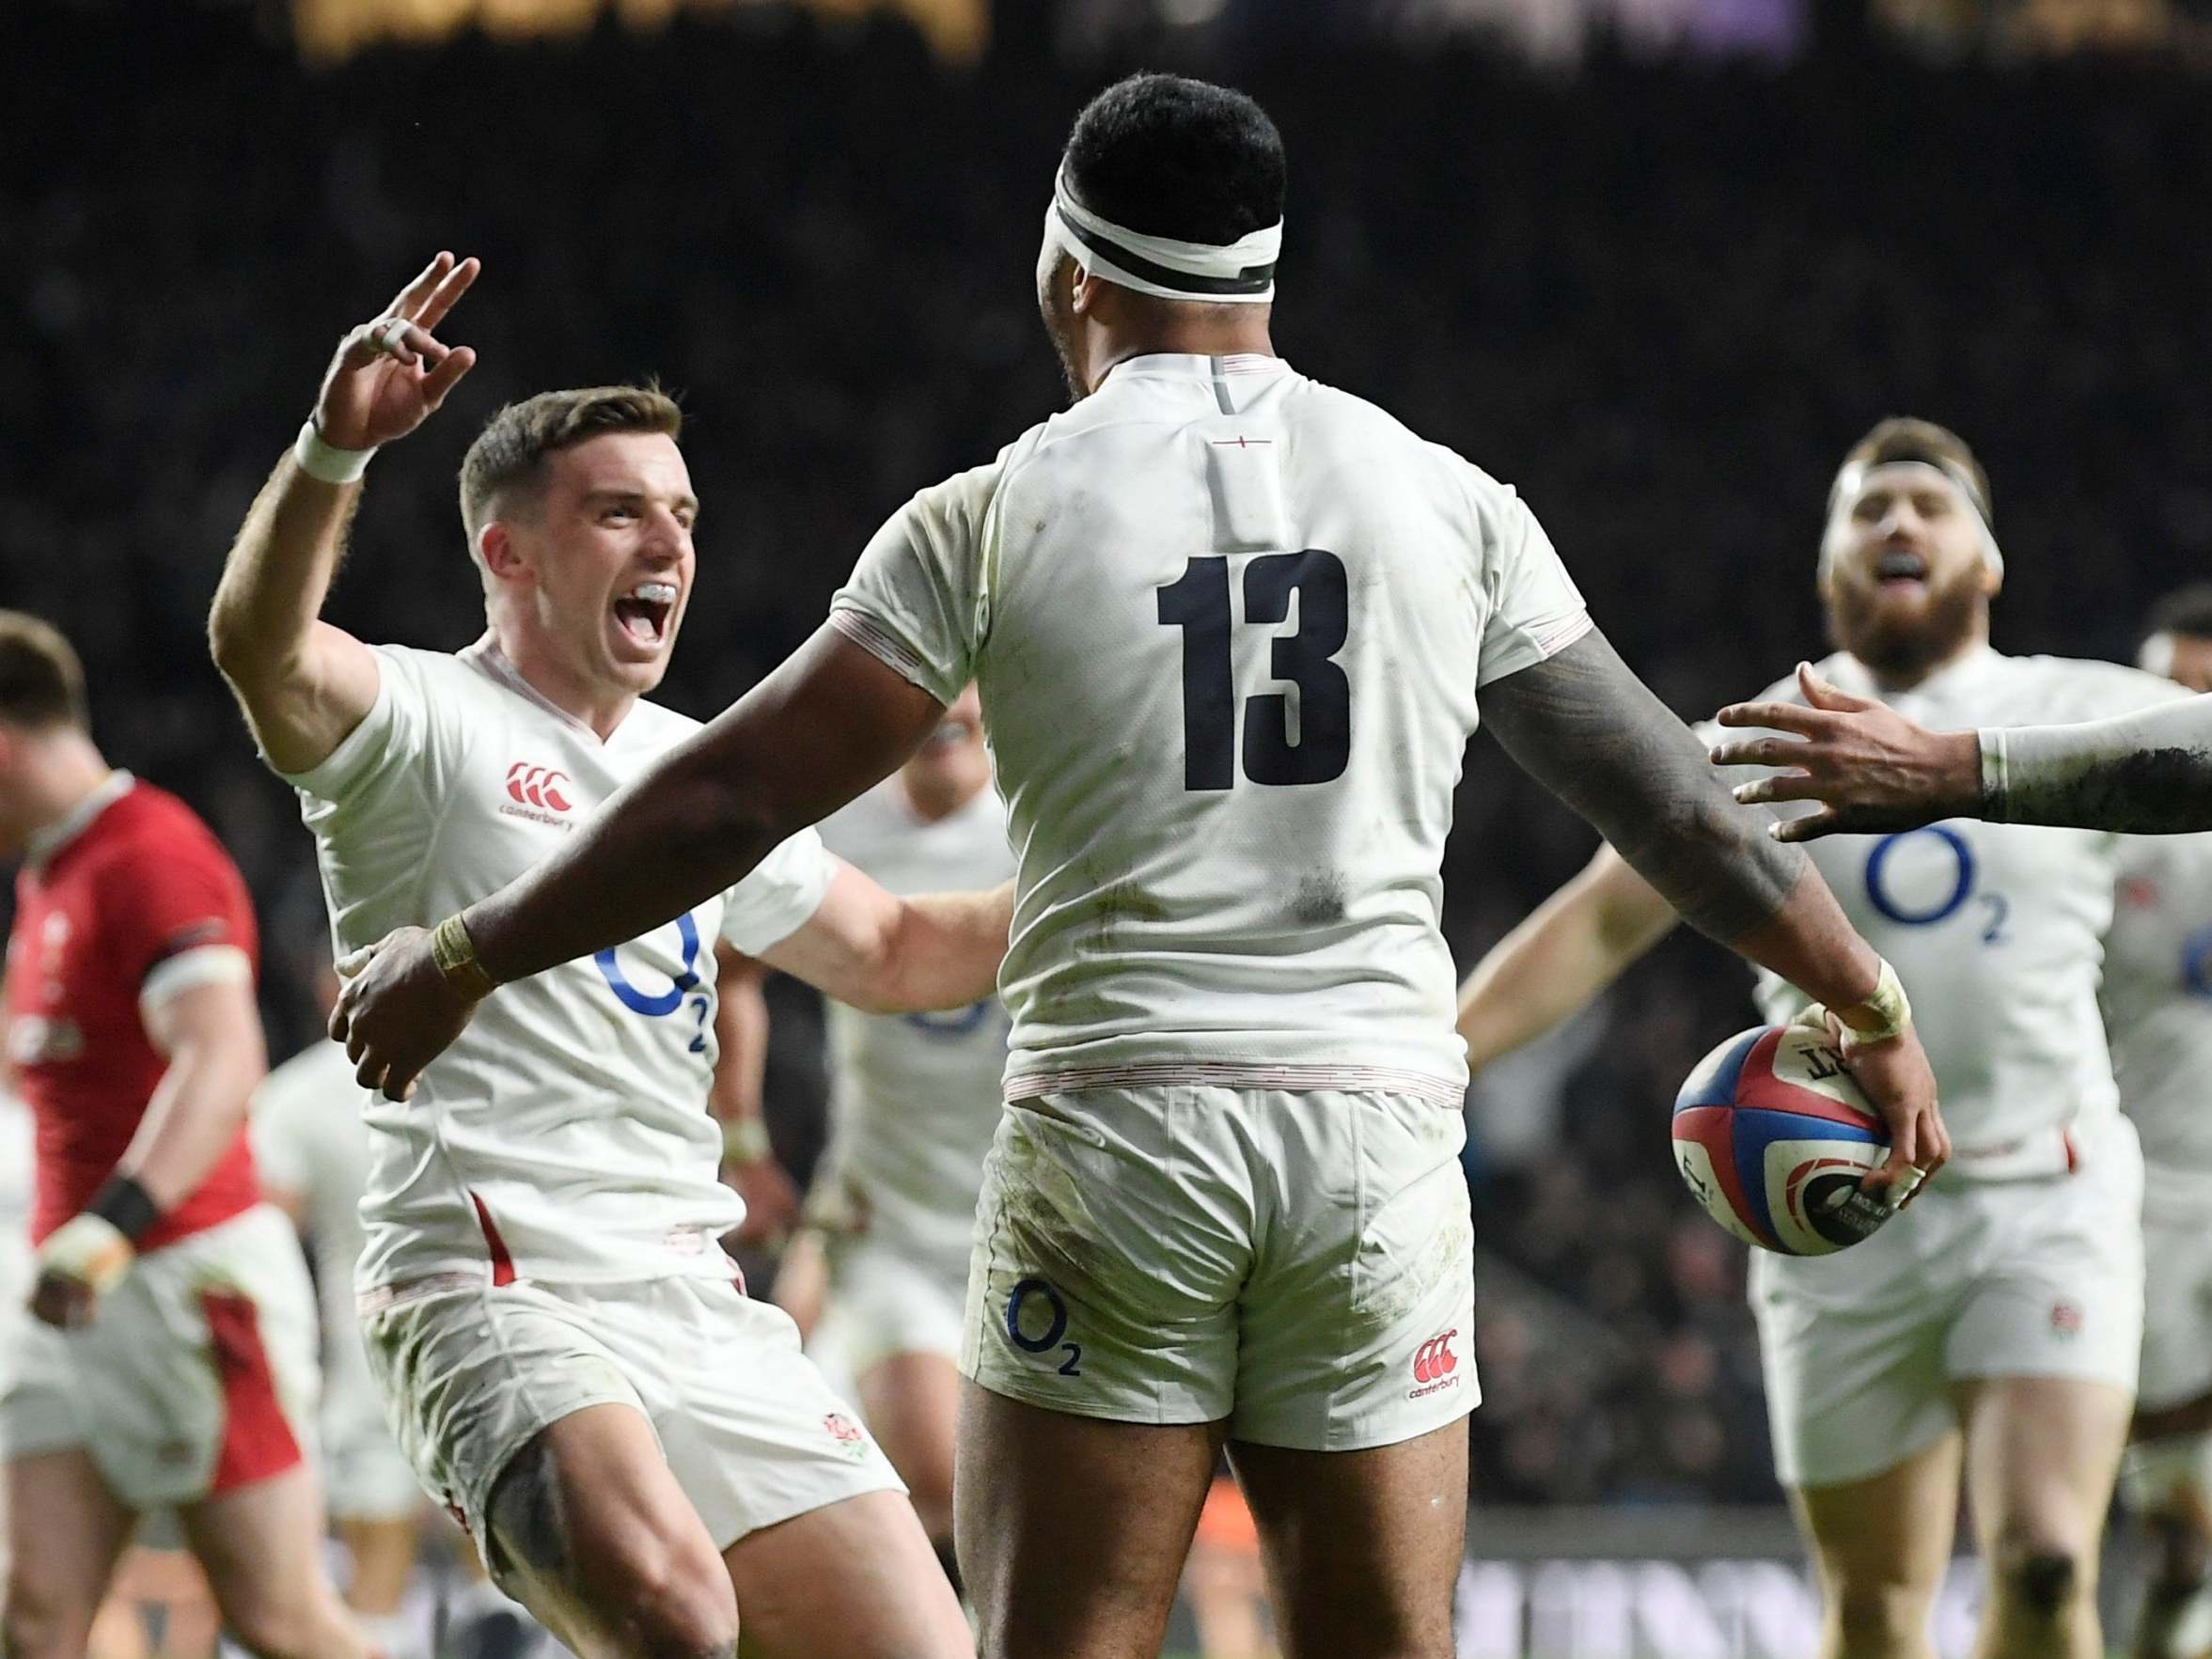 Tuilago celebrates with Ford after scoring England's third try (Reuters)